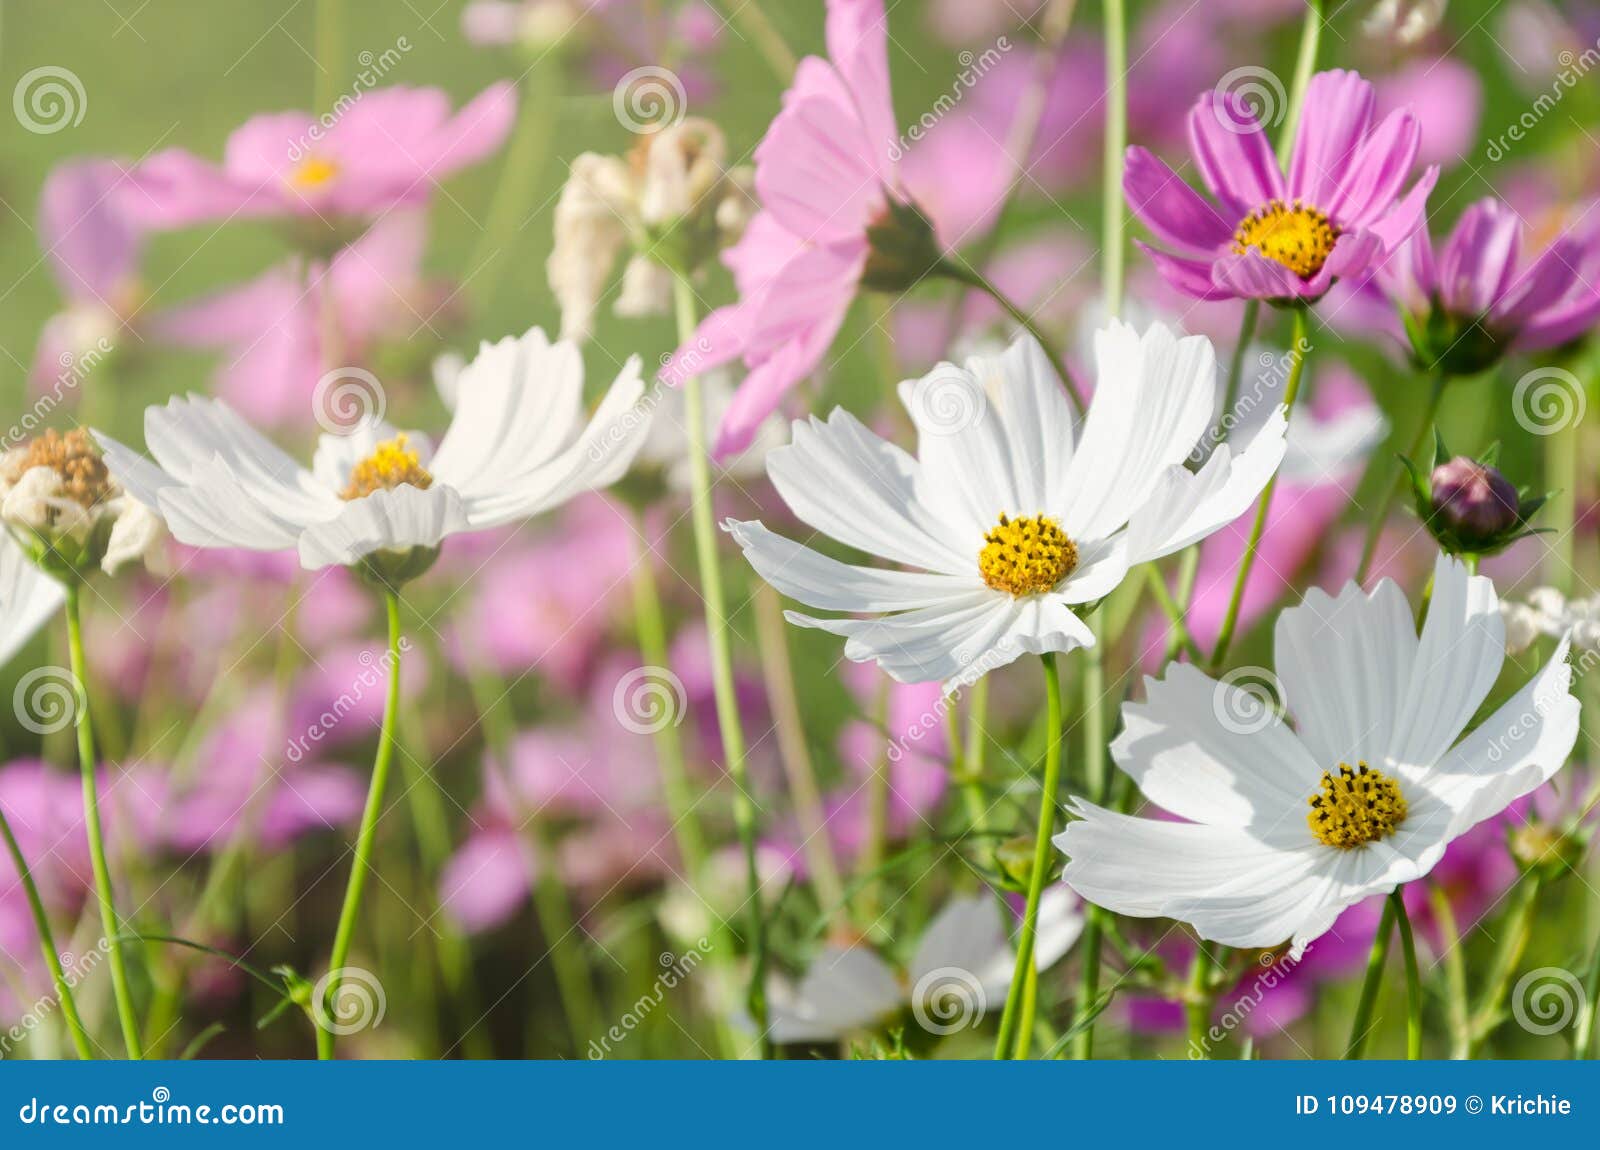 White and Pink Cosmos in Flower Garden Stock Image - Image of botany ...